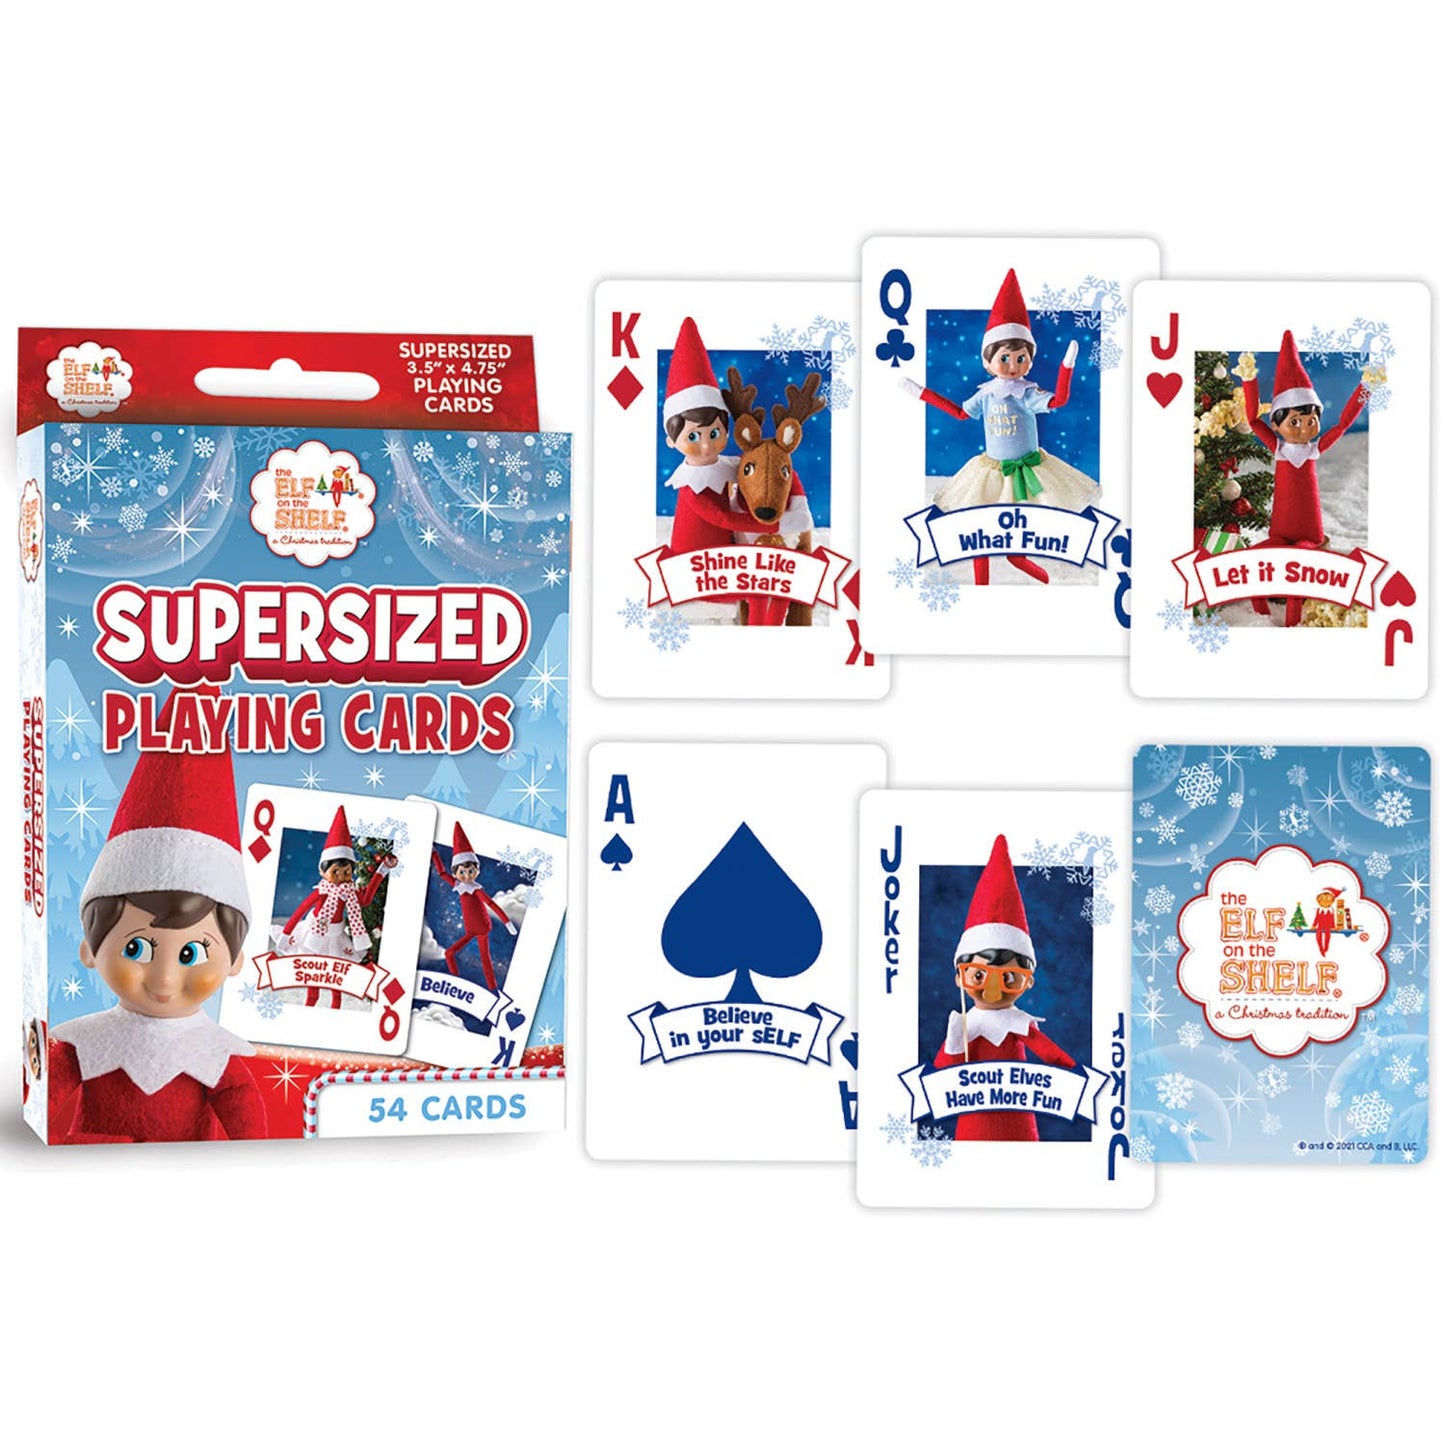 Elf on the Shelf - Supersized Playing Cards